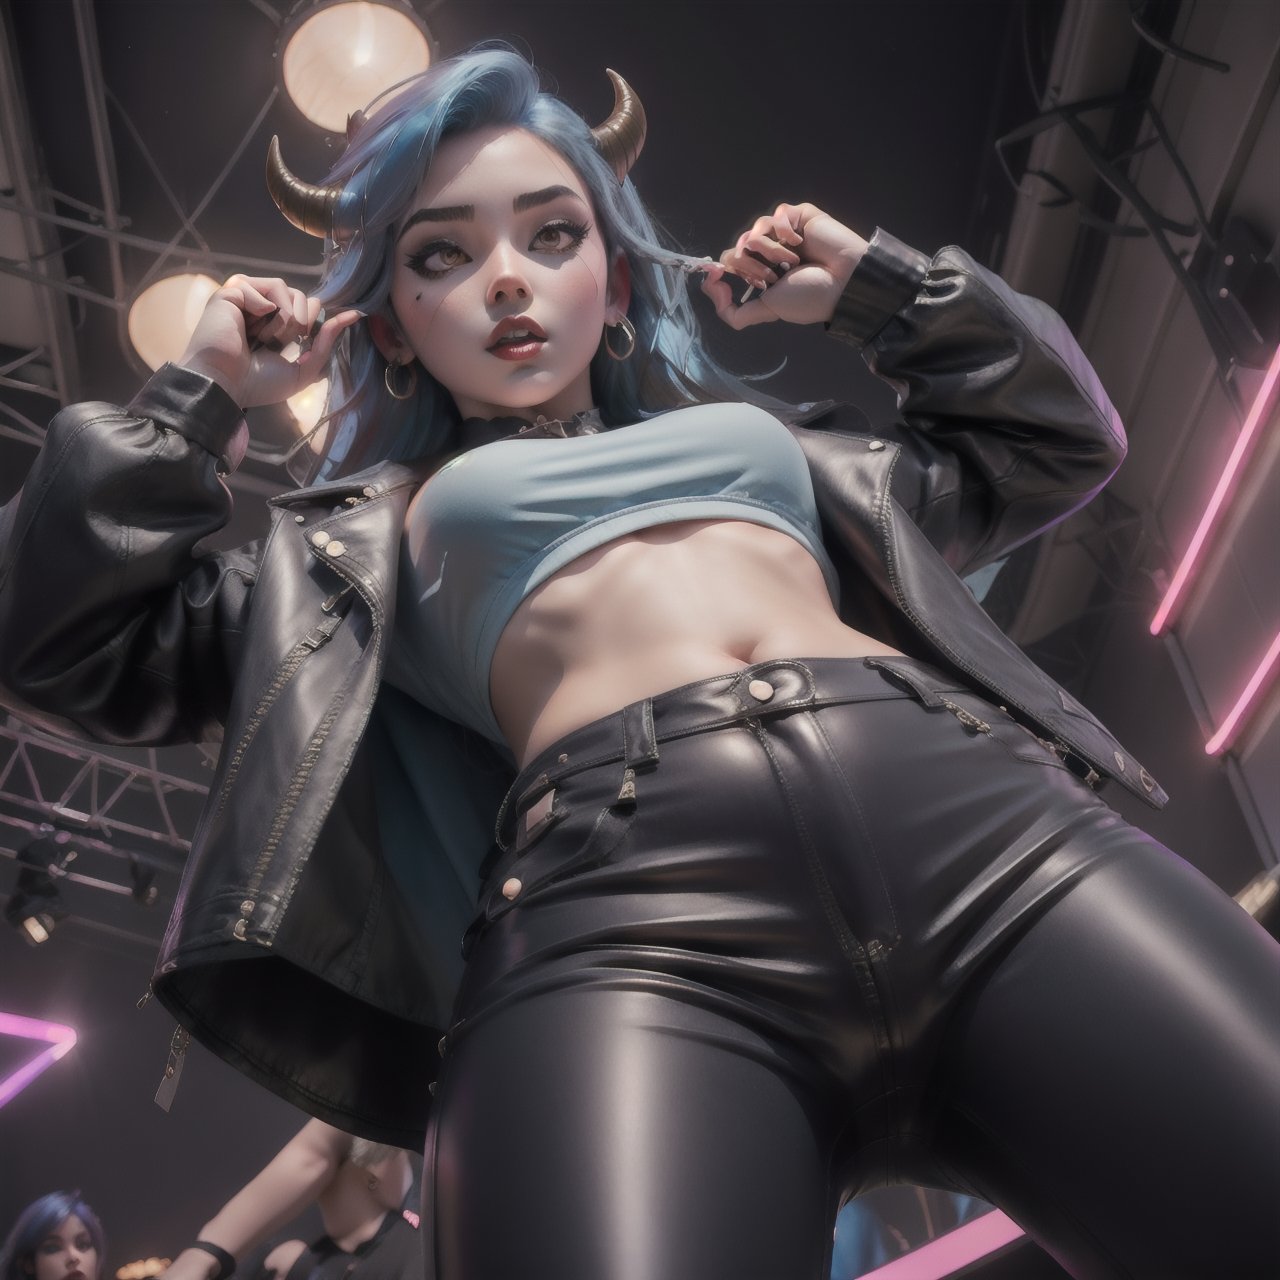 Demon girl, devil_horns, blue hair, leather jacket, leather pants, nightclub, crowded,from below